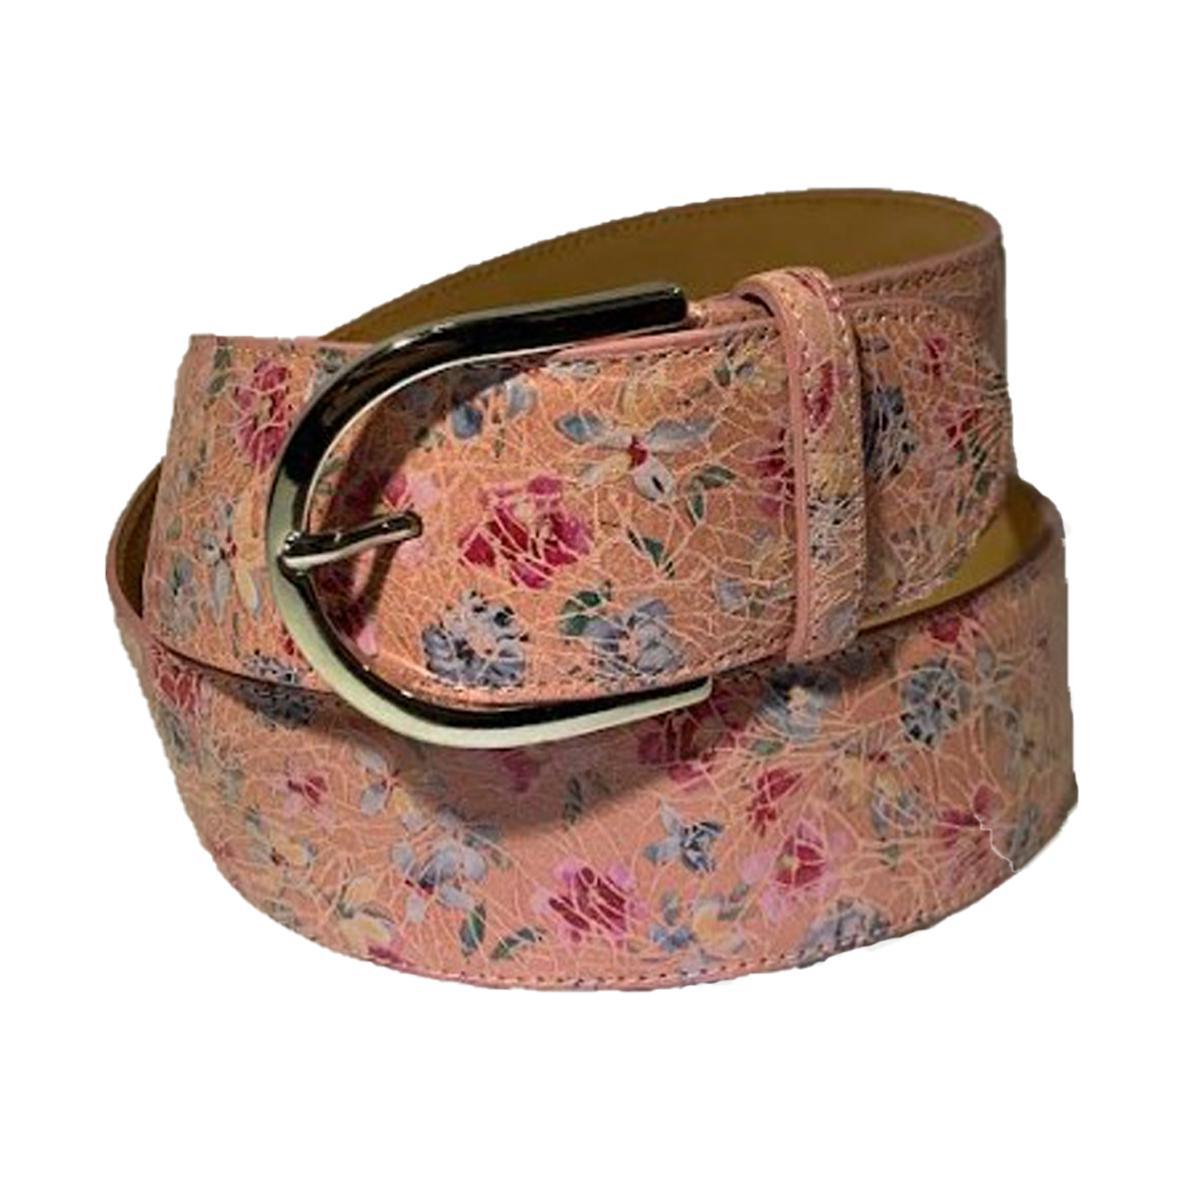 Tailored Sportsman Printed Leather Belt